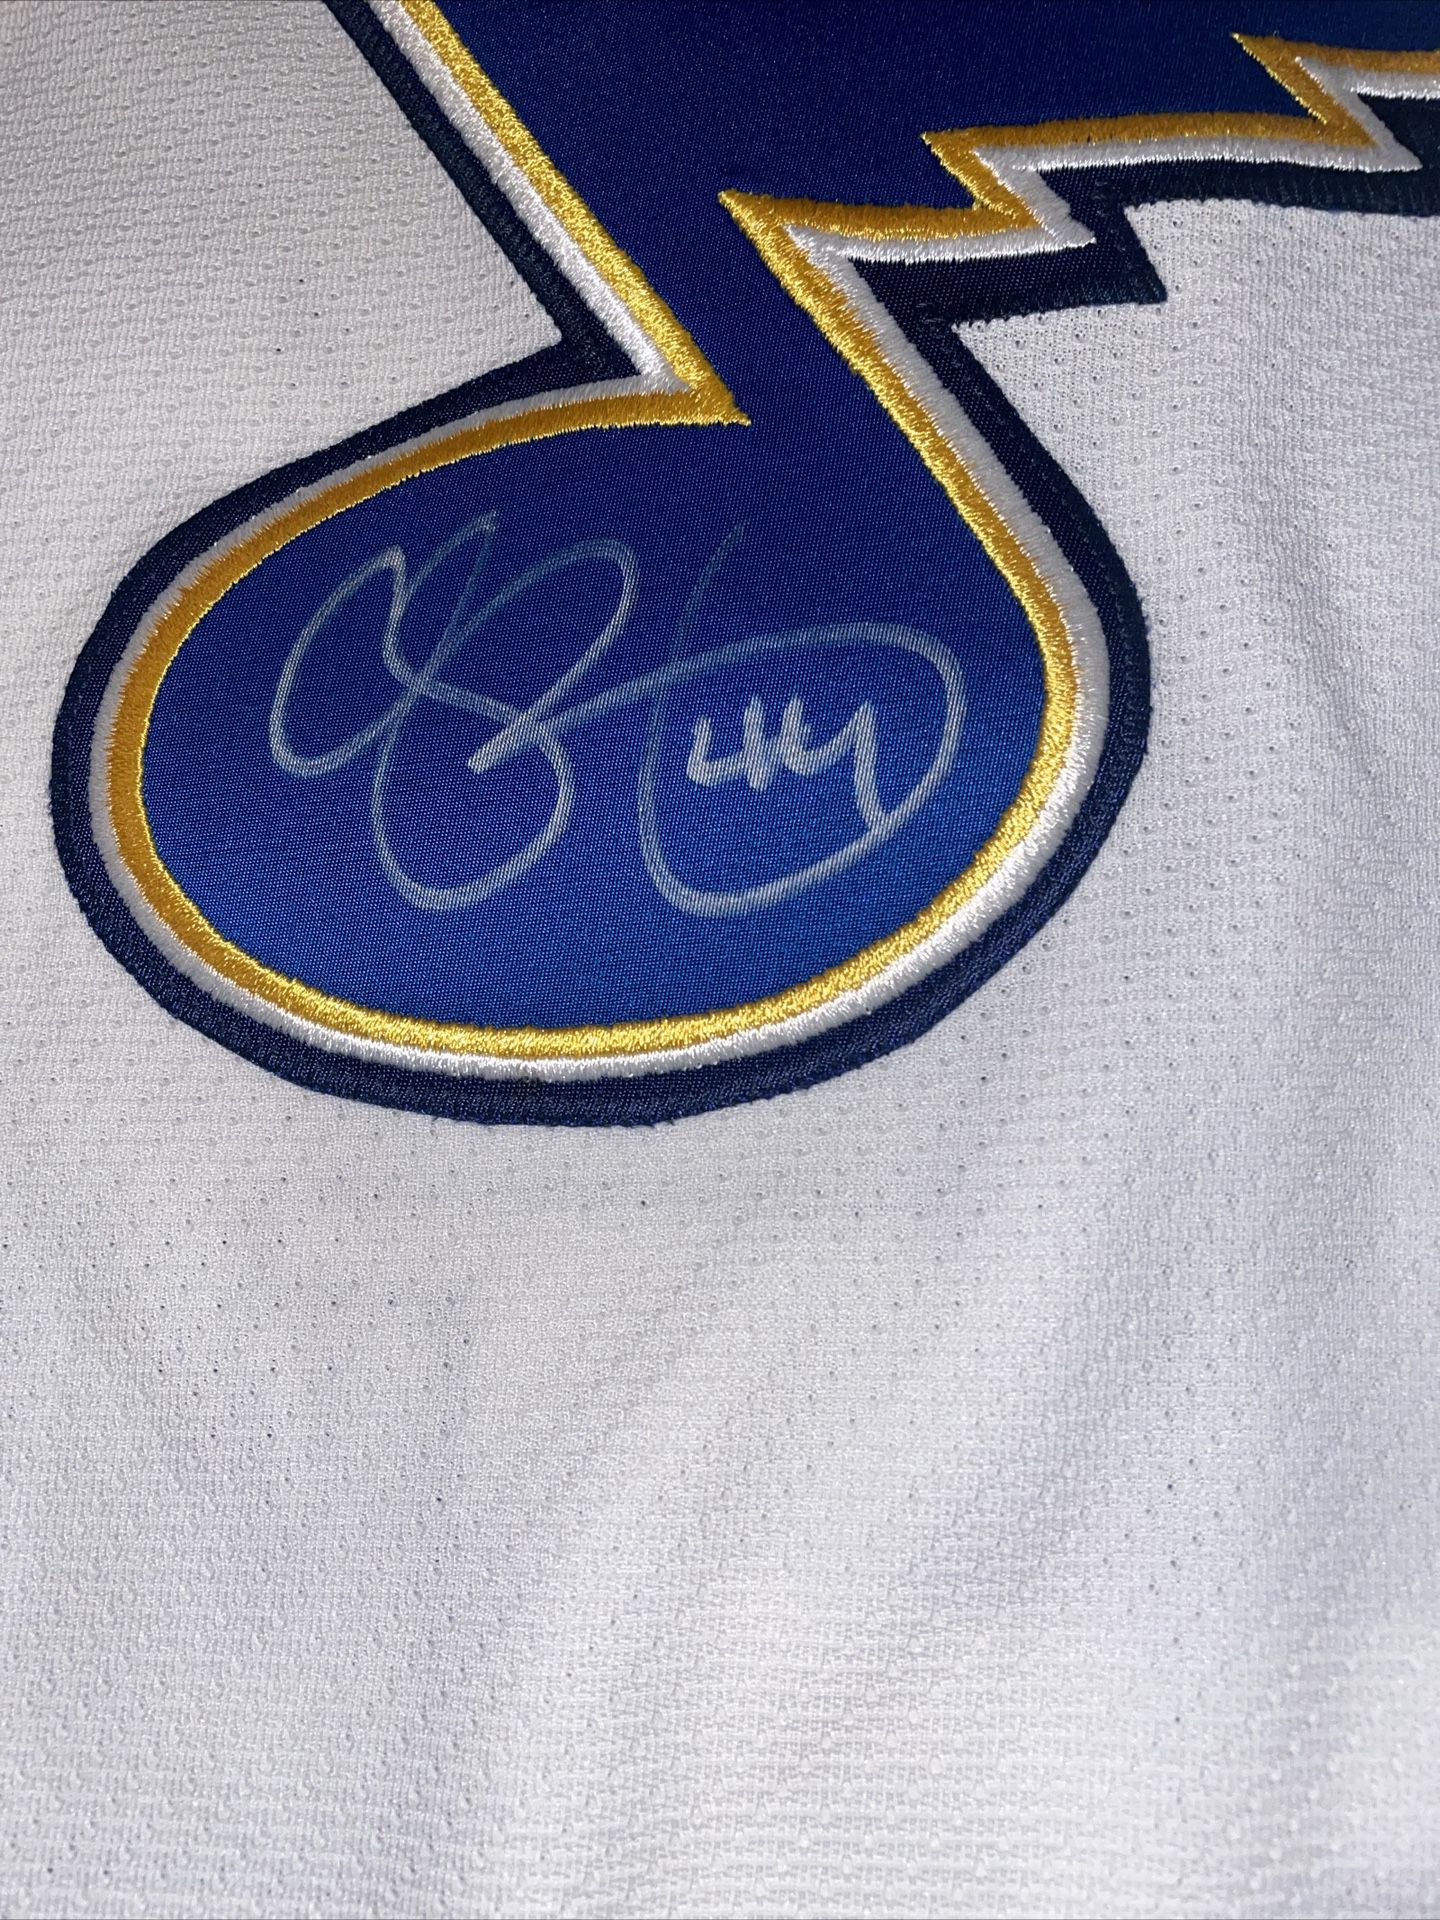 Vintage 1994 Hof Signed Chris Pronger Jersey for Sale in St. Louis, MO -  OfferUp